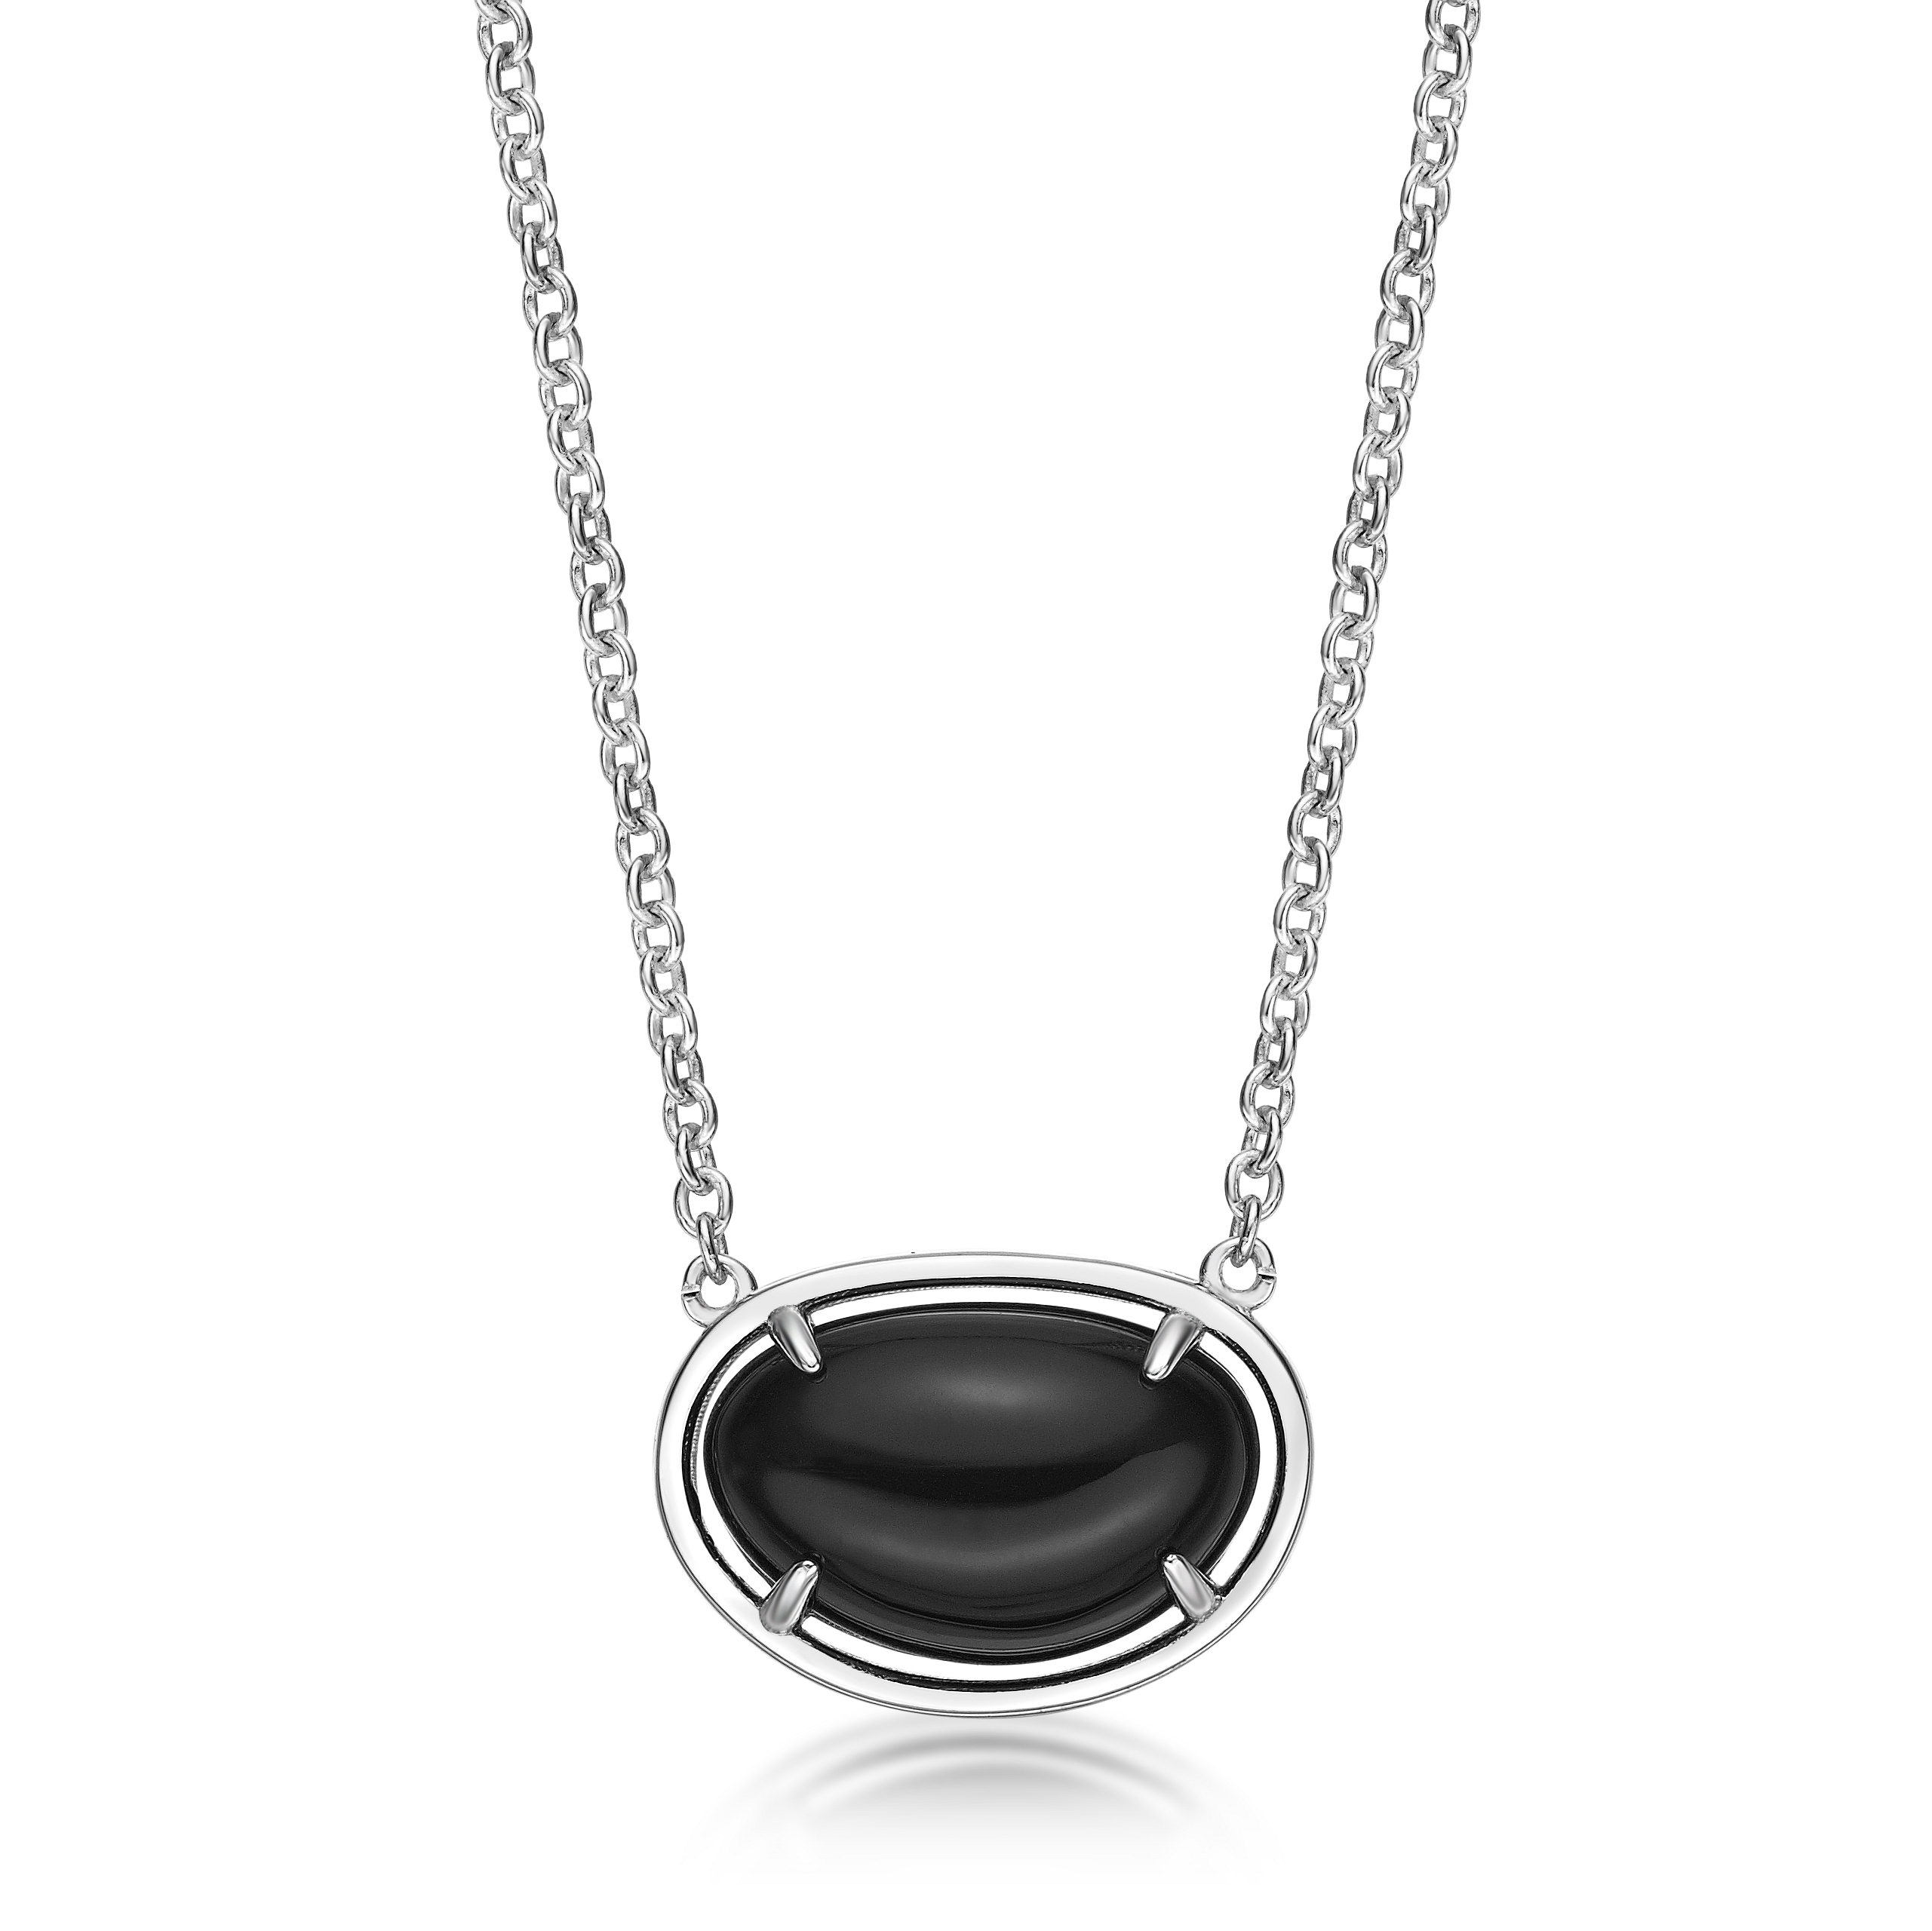 51601-pendant-default-collection-sterling-silver-51601-2-1.jpg